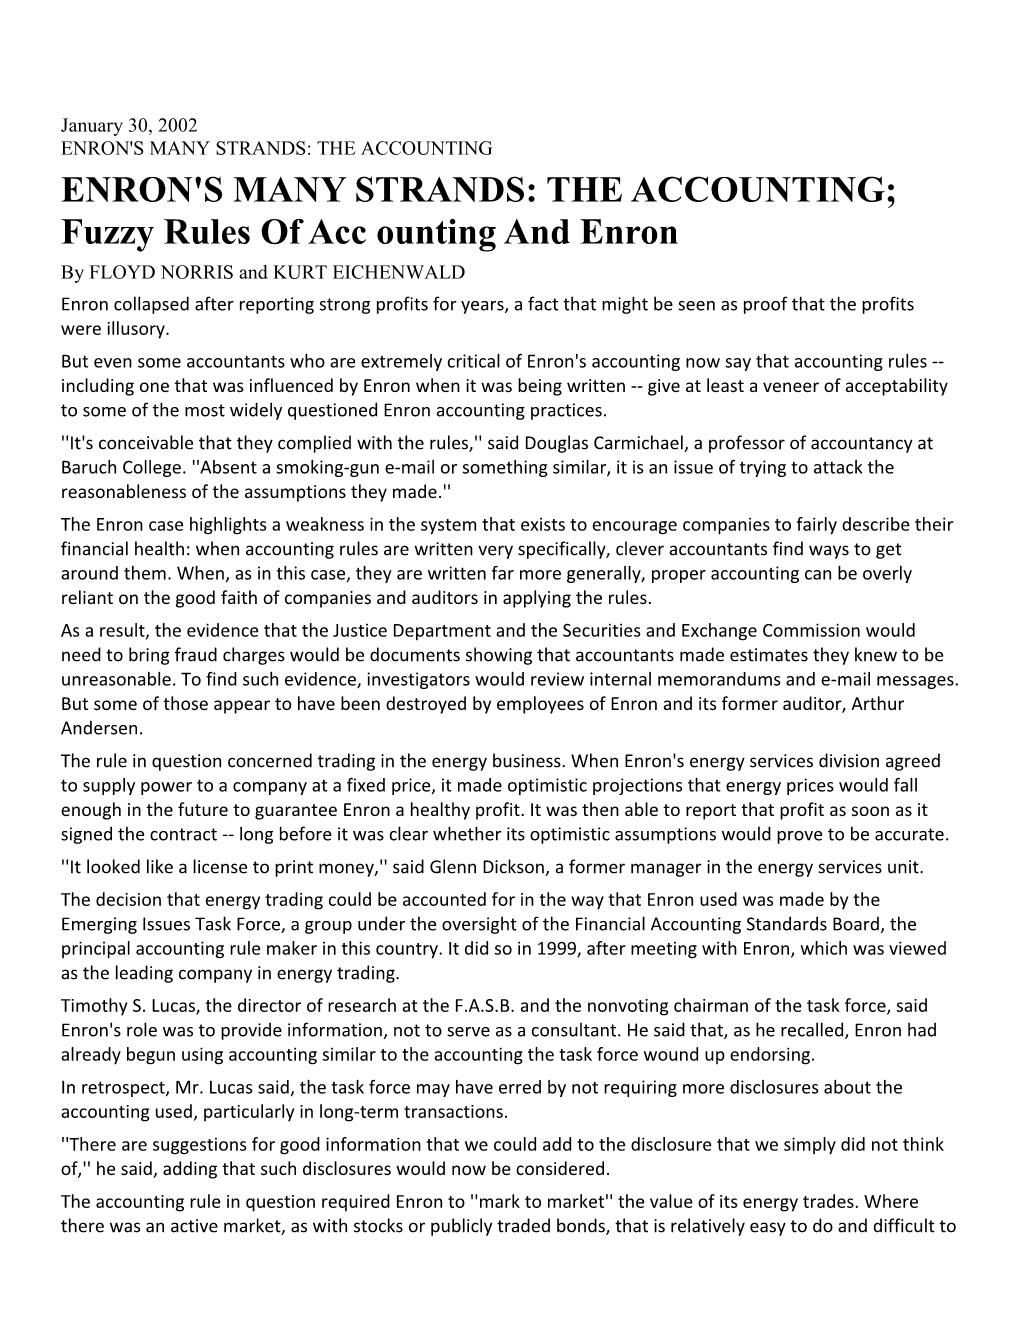 ENRON's MANY STRANDS: the ACCOUNTING; Fuzzy Rules of Accounting and Enron